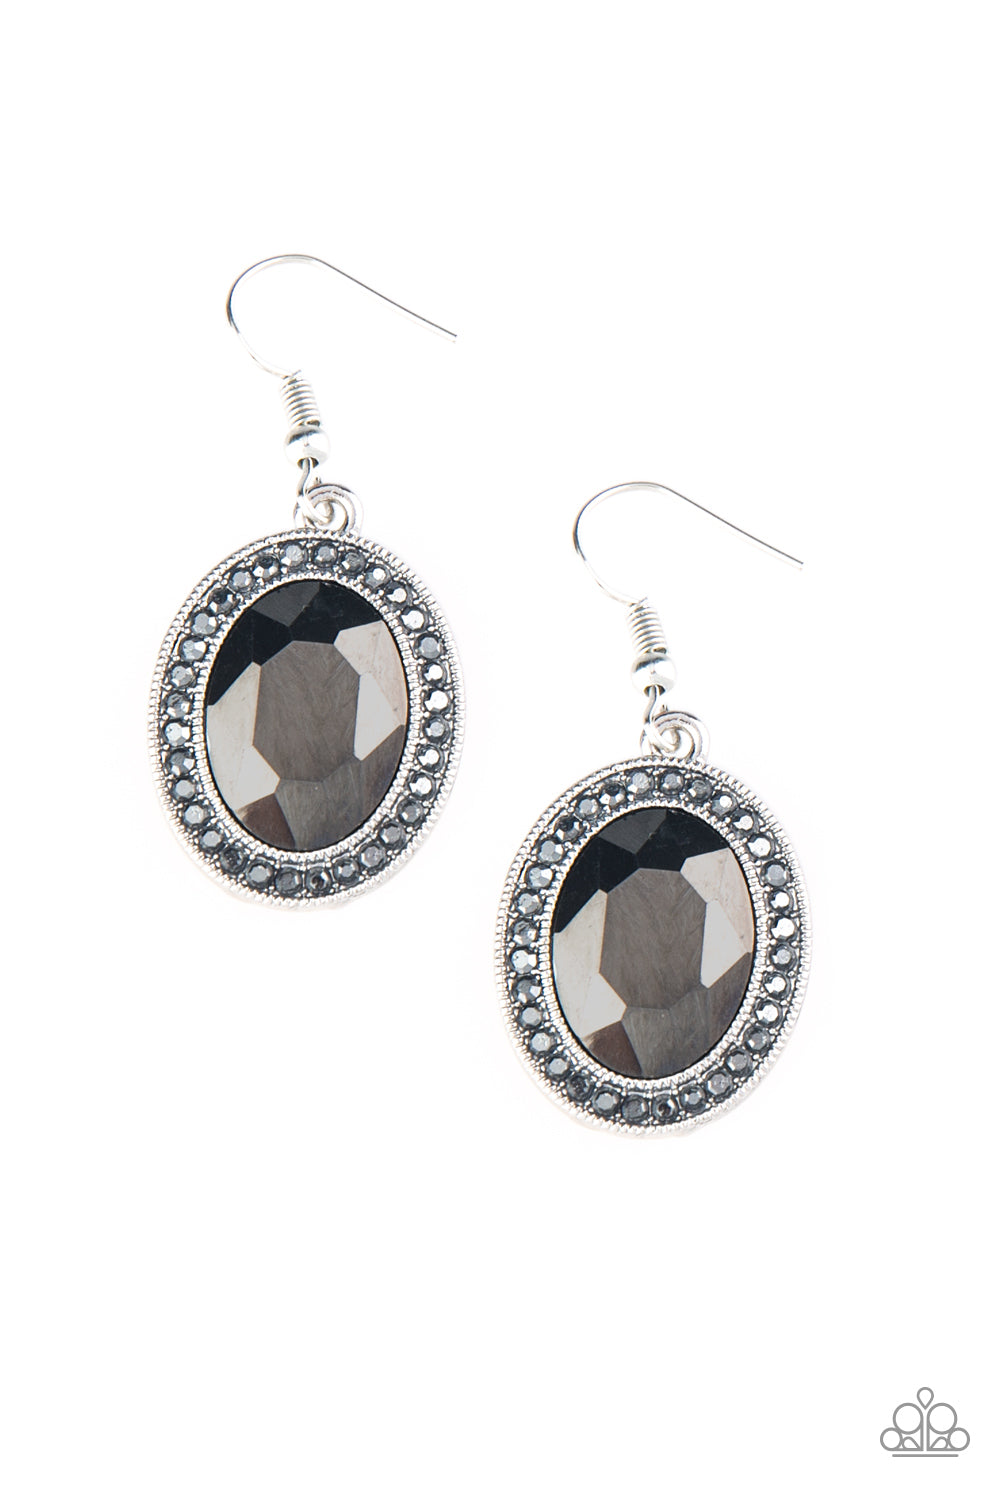 ONLY FAME IN TOWN - SILVER OVAL HEMATITE EARRINGS